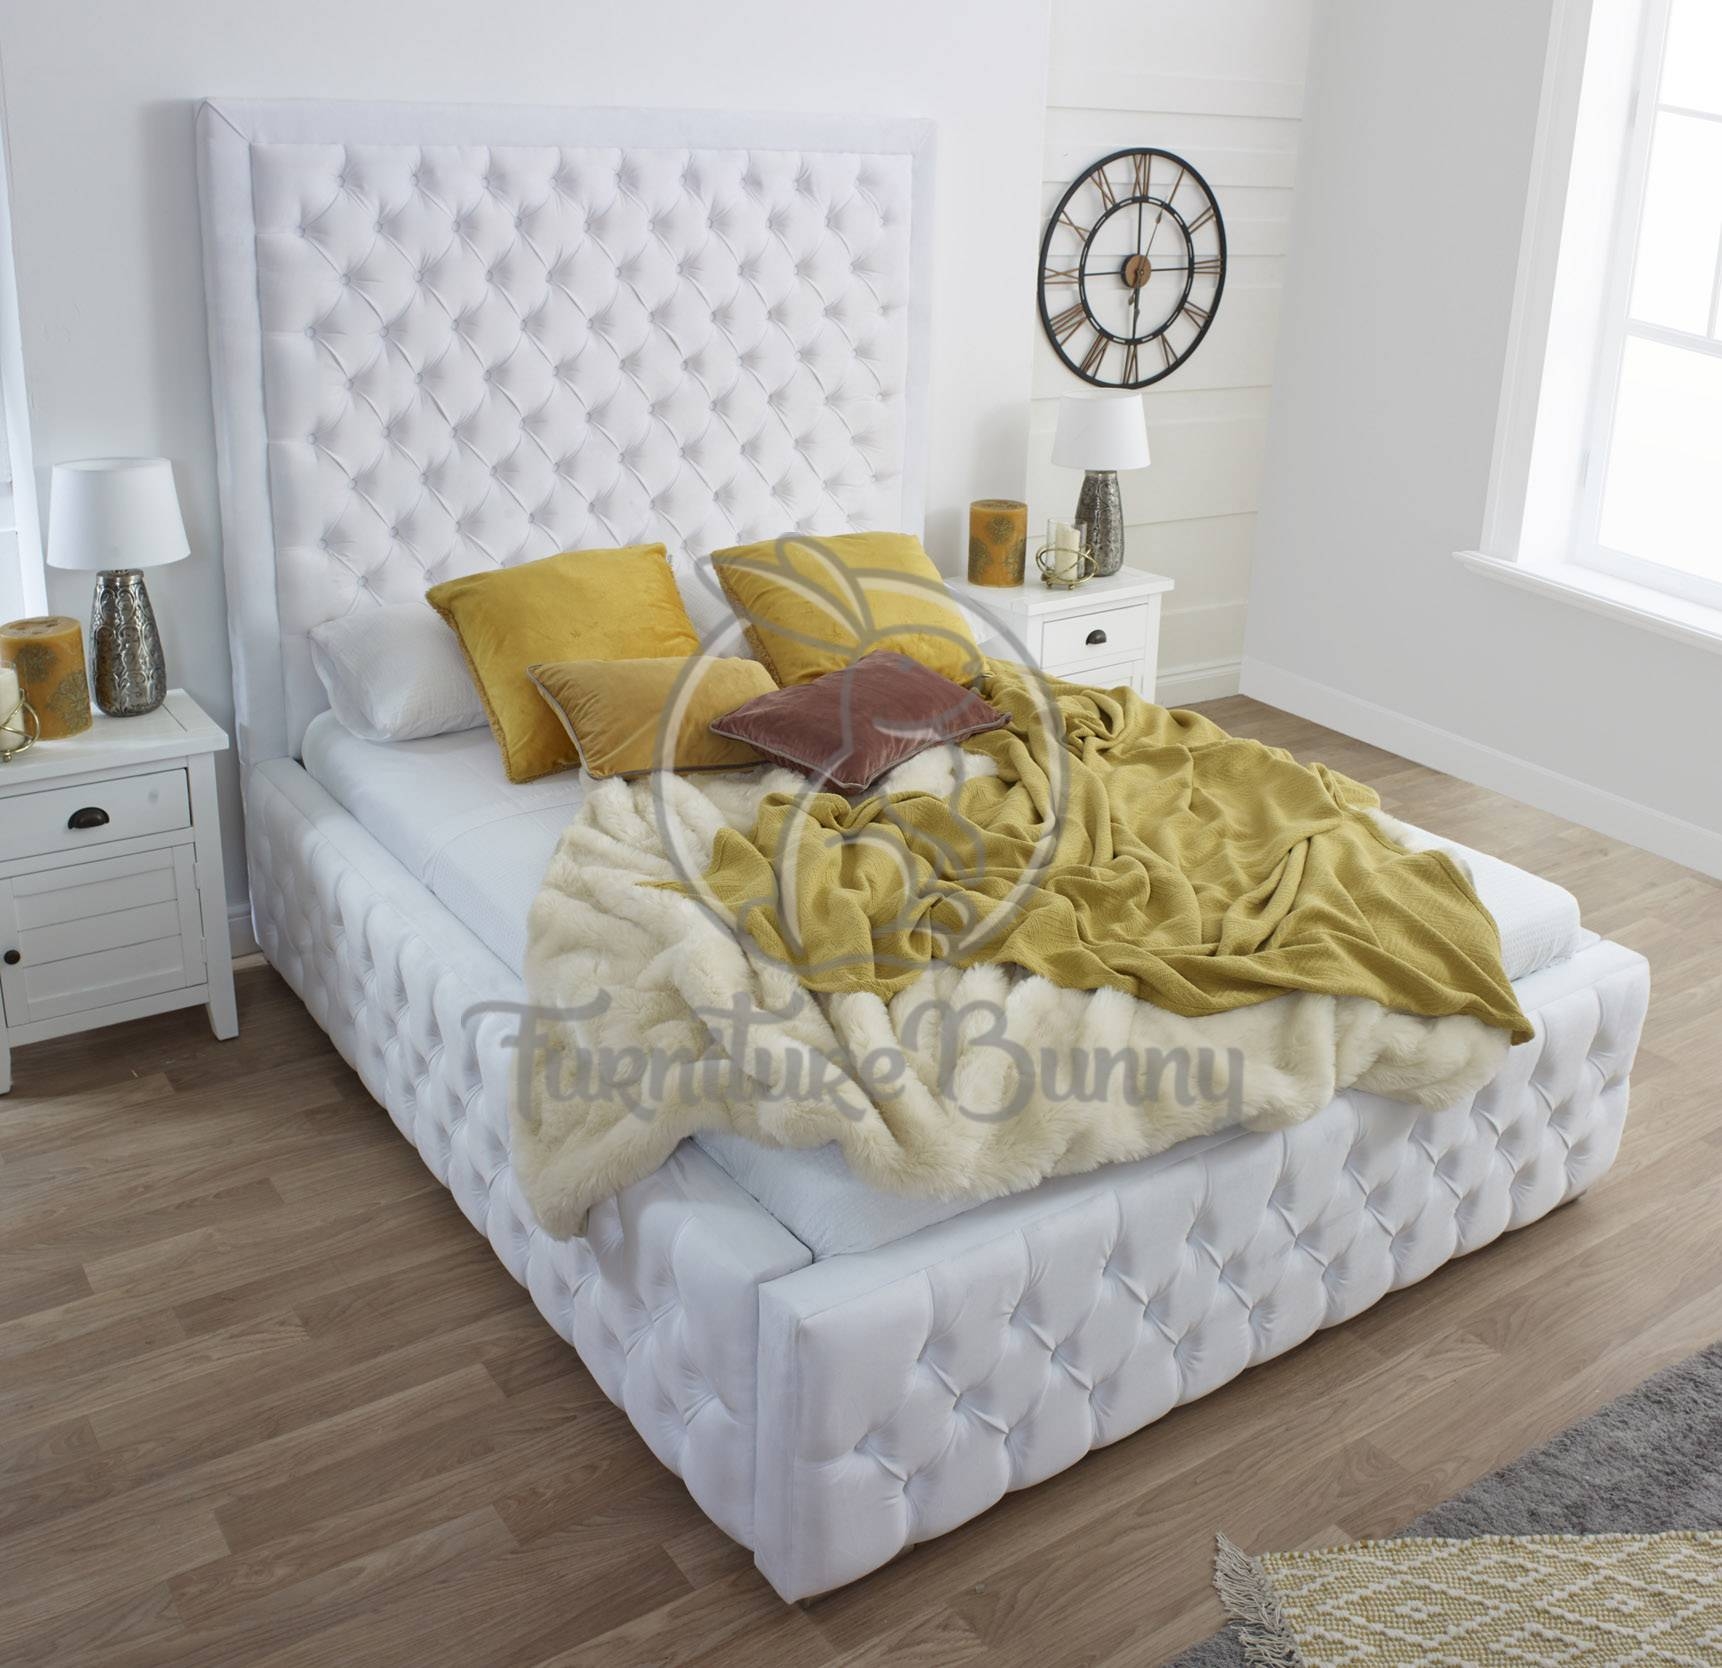 The Superior Bed – Furniture Bunny